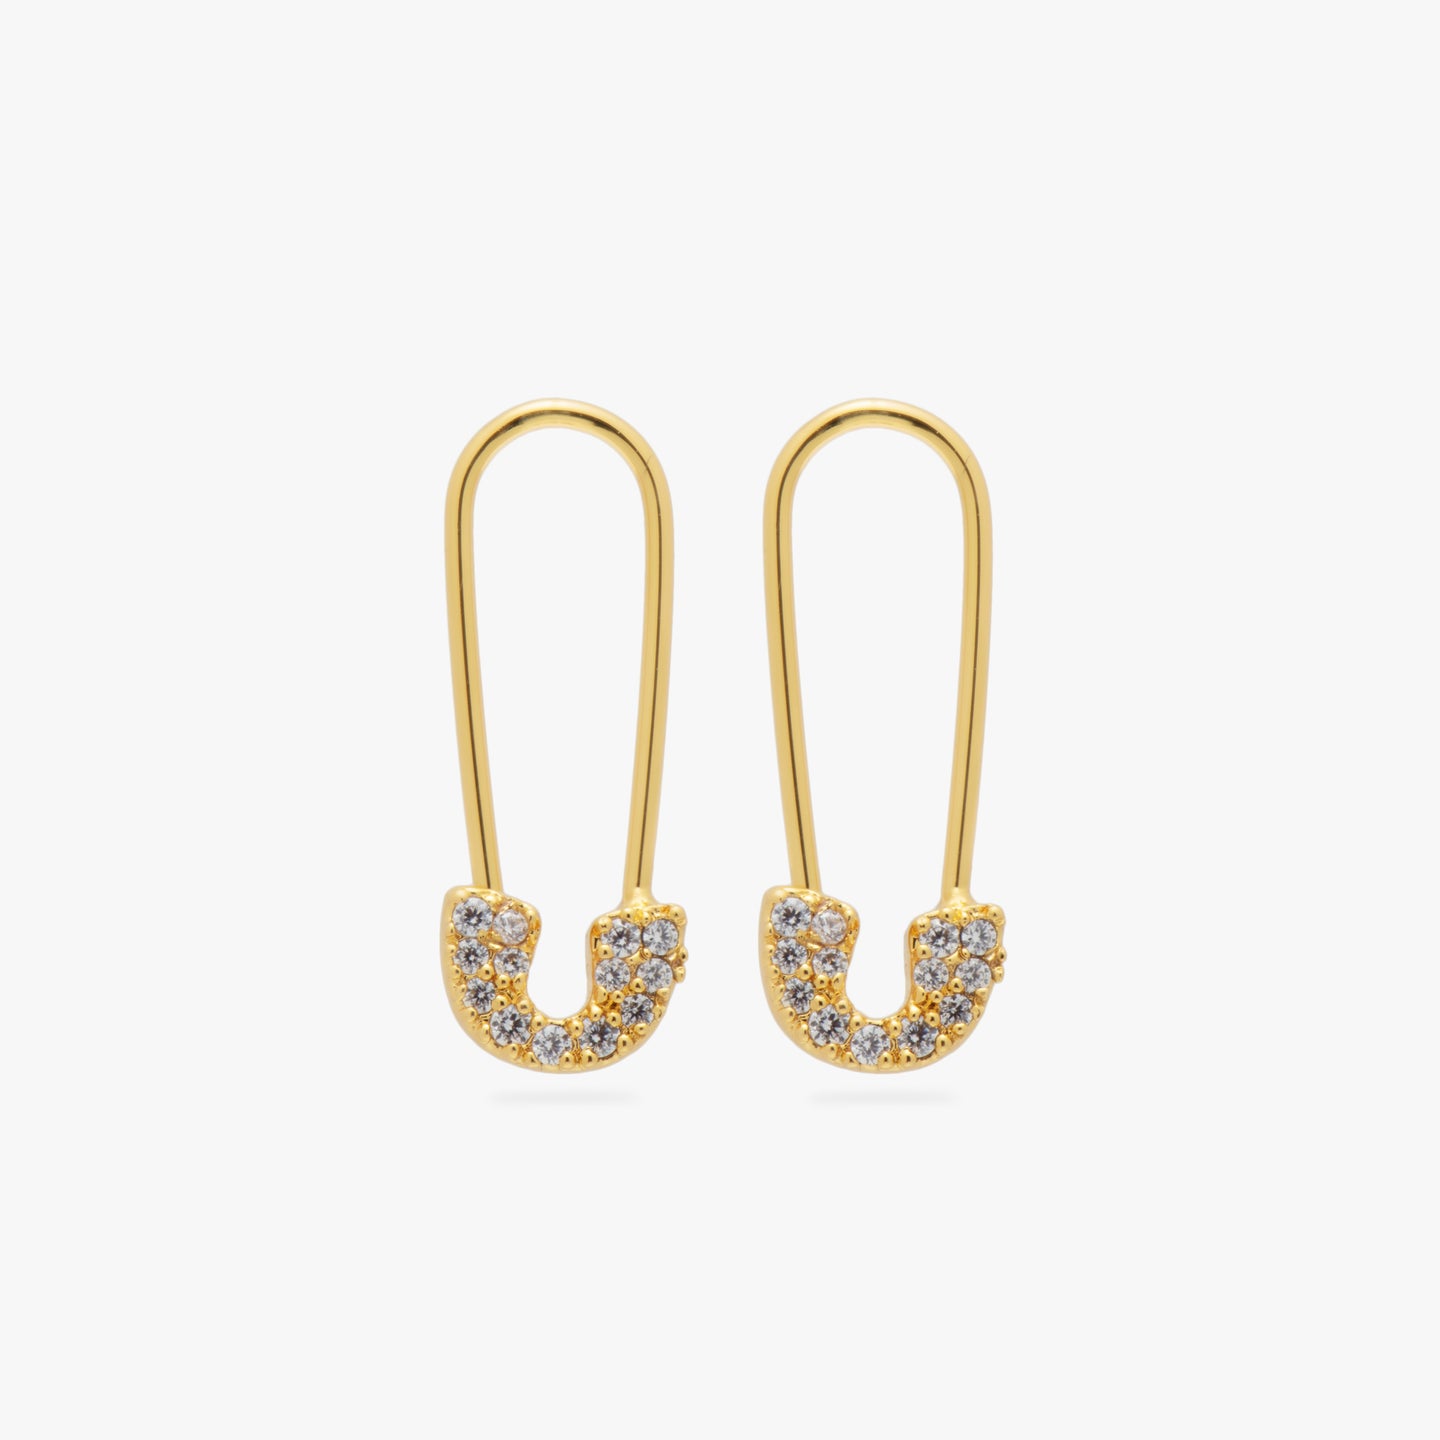 A pair of gold/clear pave safety pin shaped earrings [pair] color:null|gold/clear